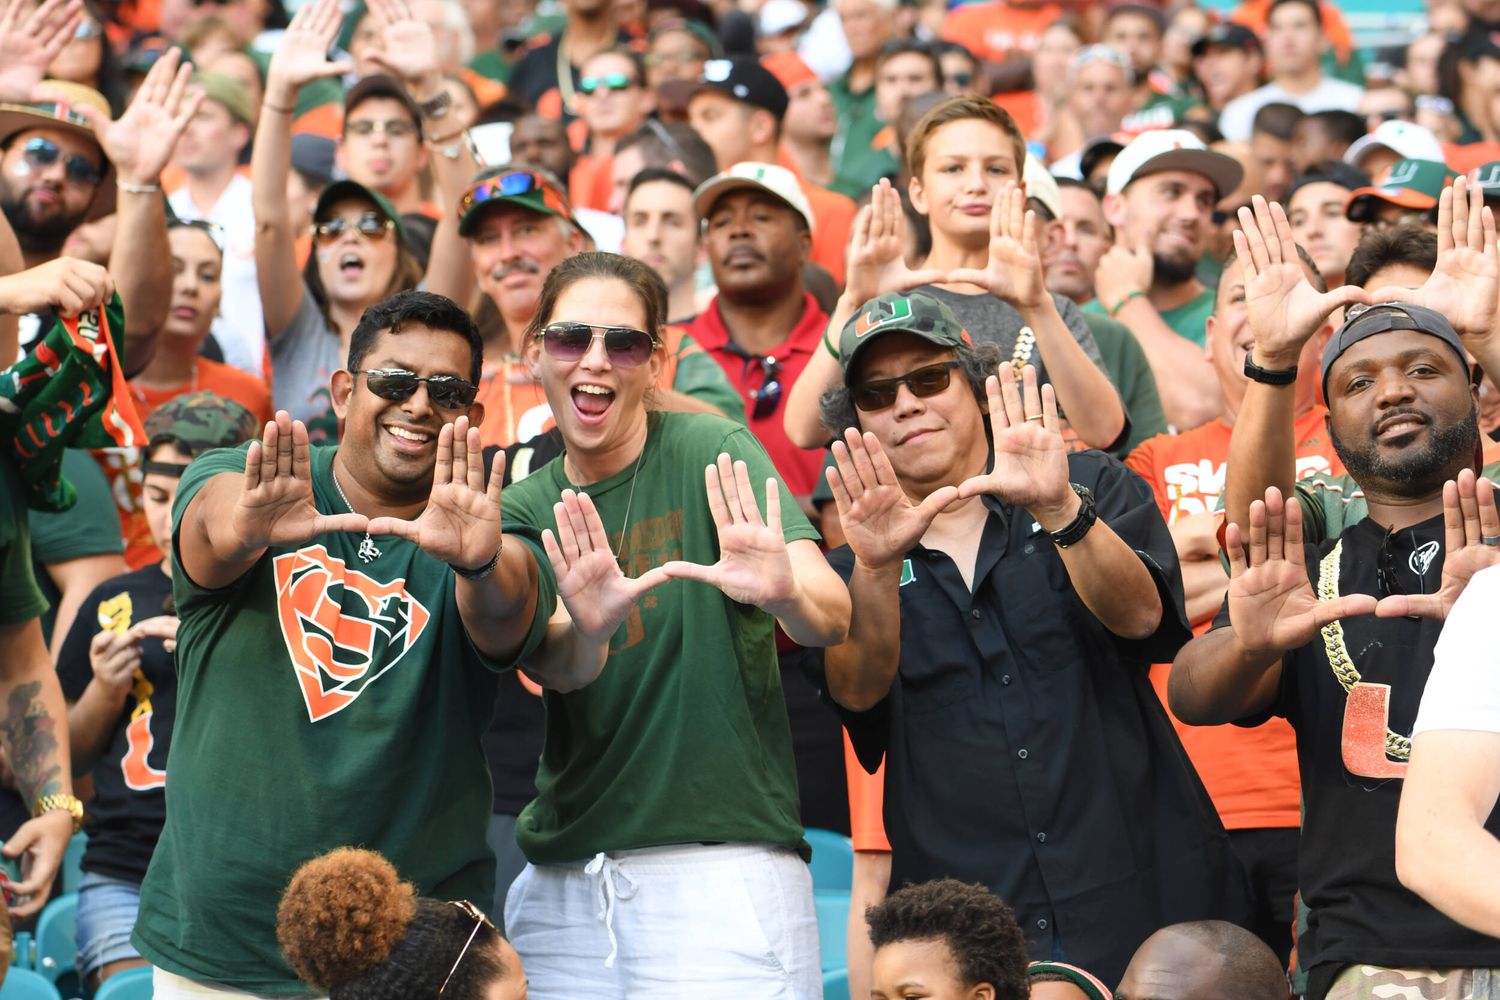 Photographing for the Miami Hurricanes Football Team